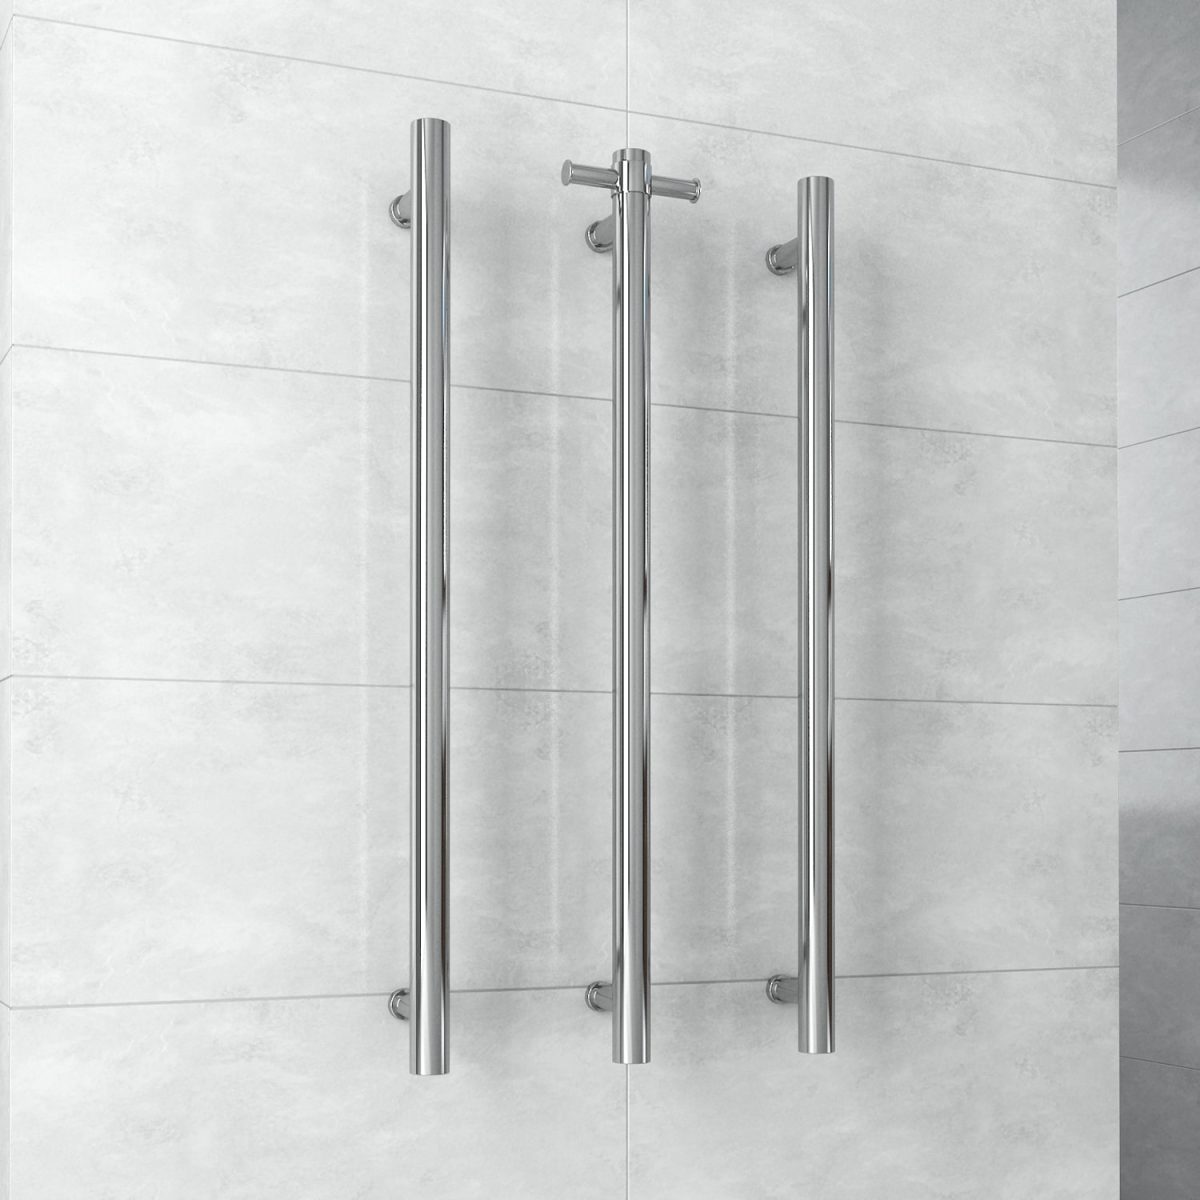 THERMOGROUP VSH900H VERTICAL SINGLE HEATED TOWEL RAIL 240VOLT